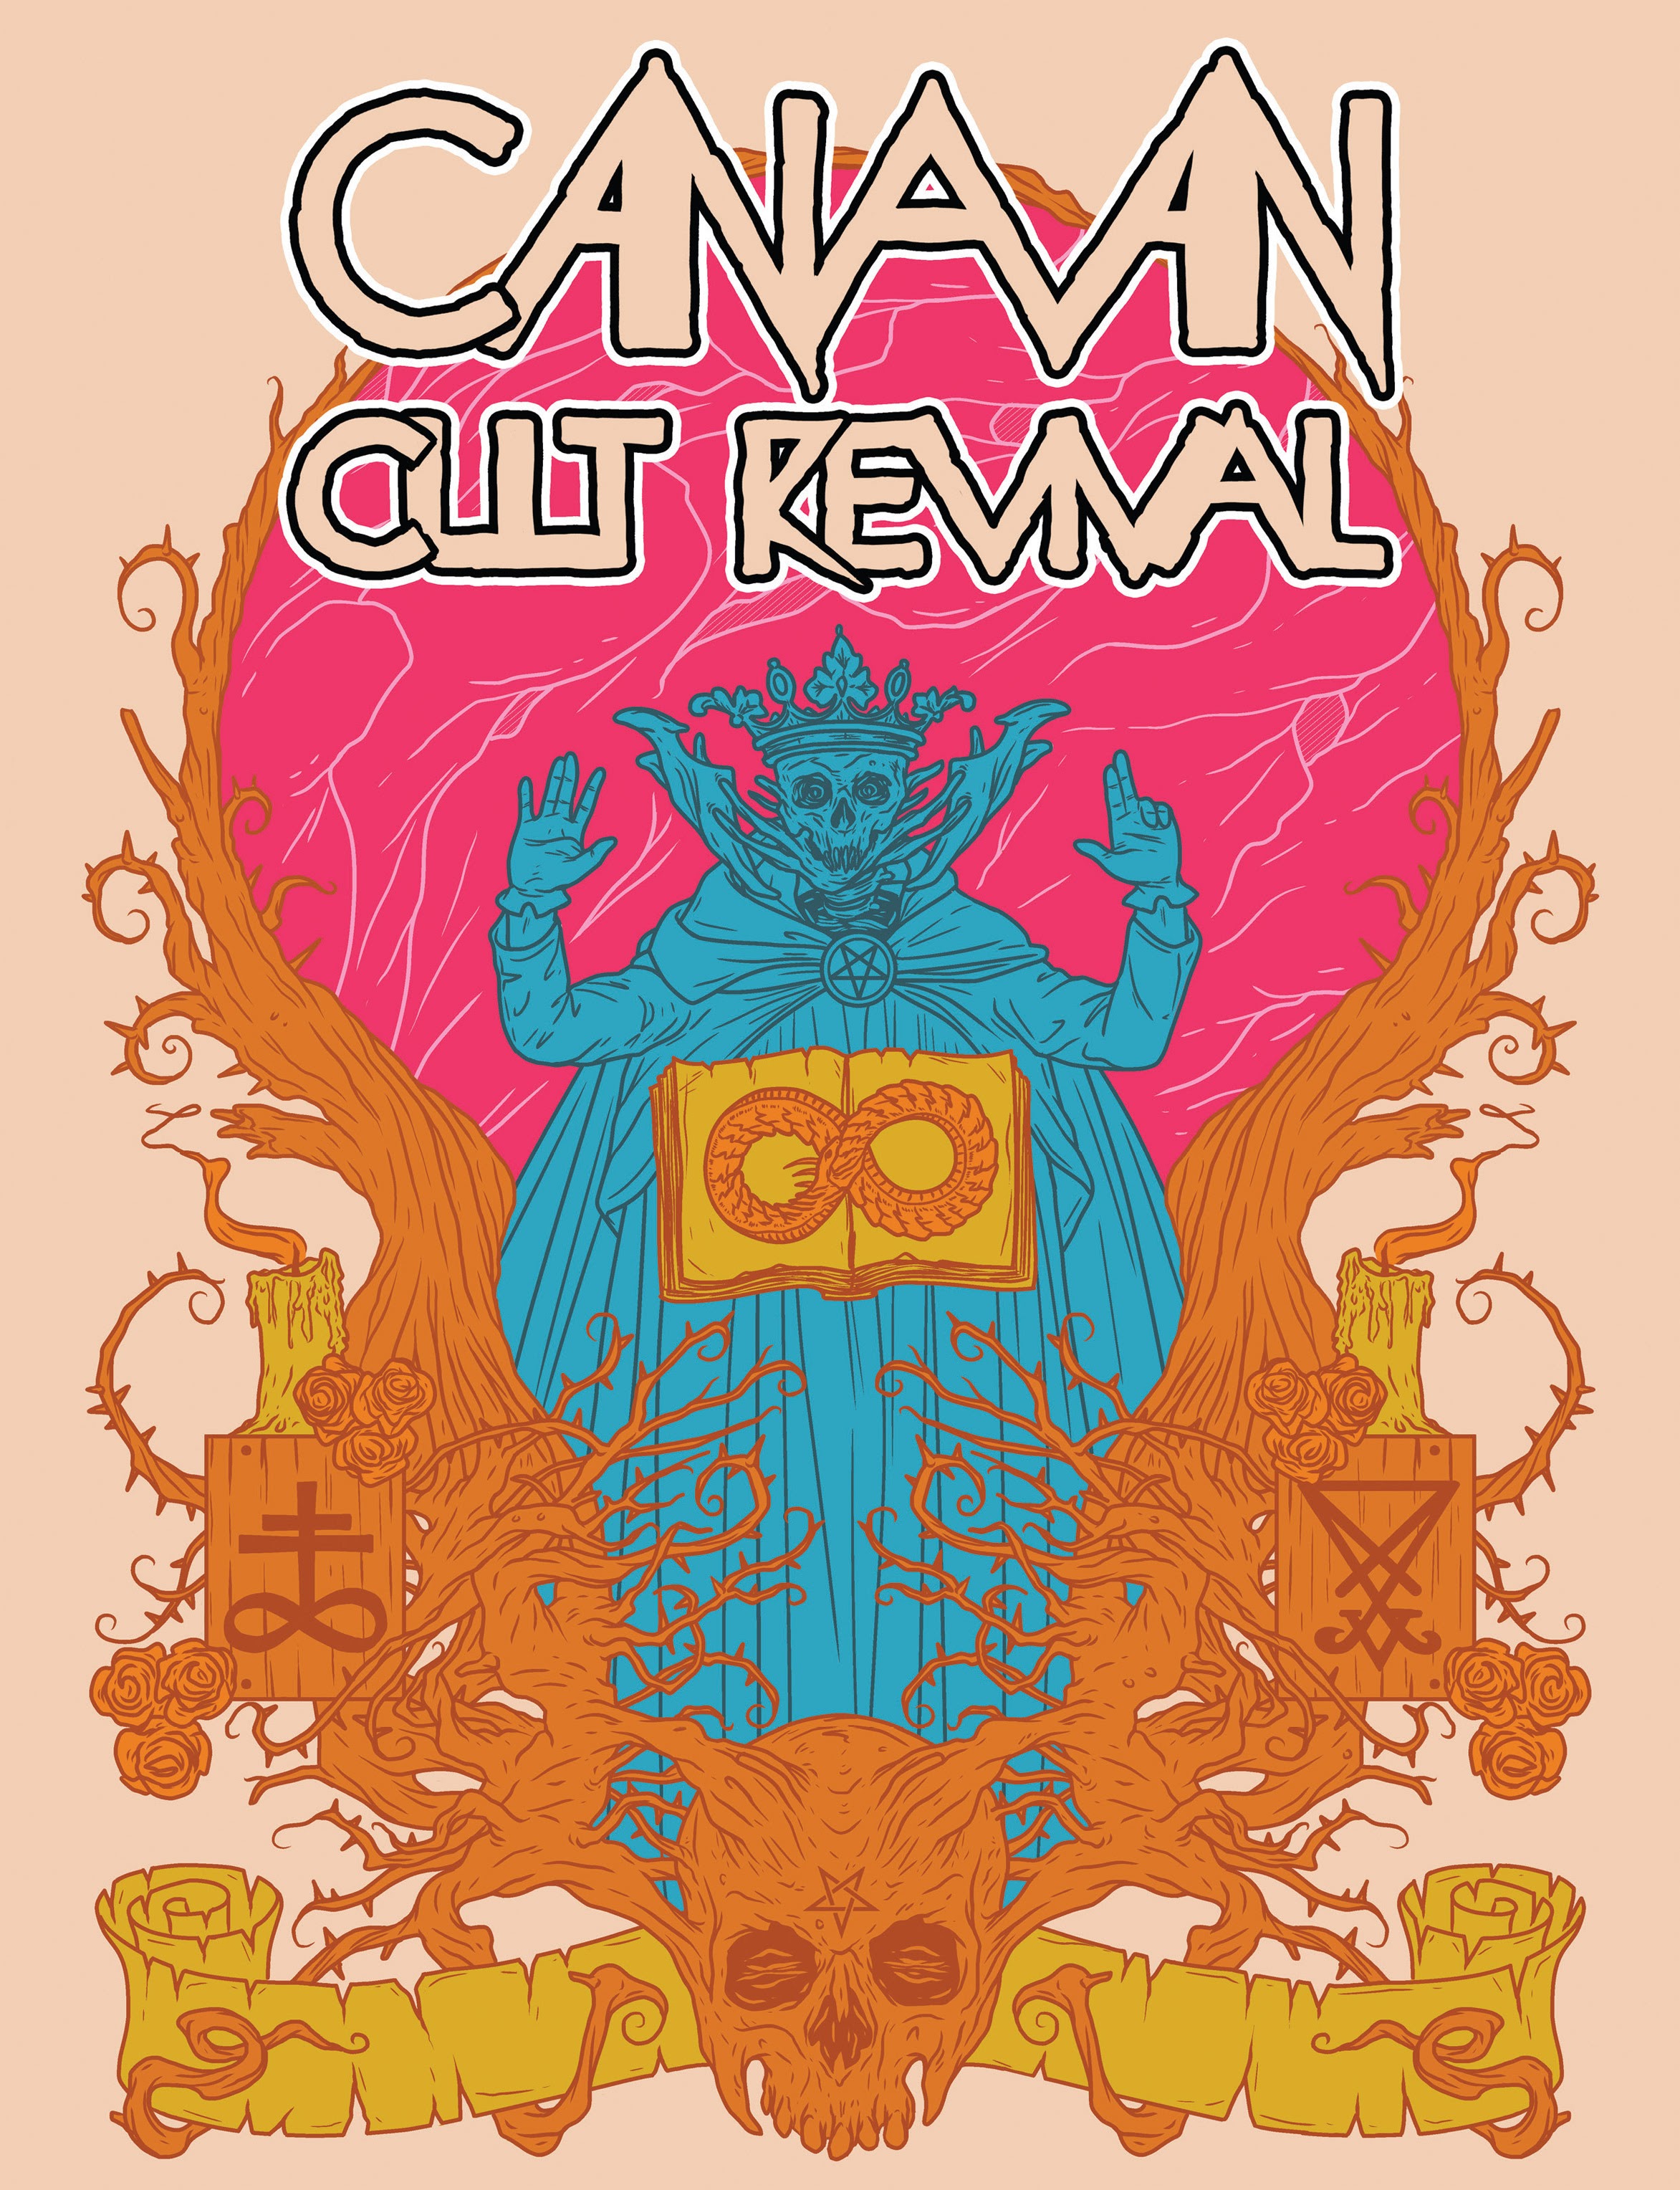 Read online Canaan Cult Revival comic -  Issue # TPB - 1